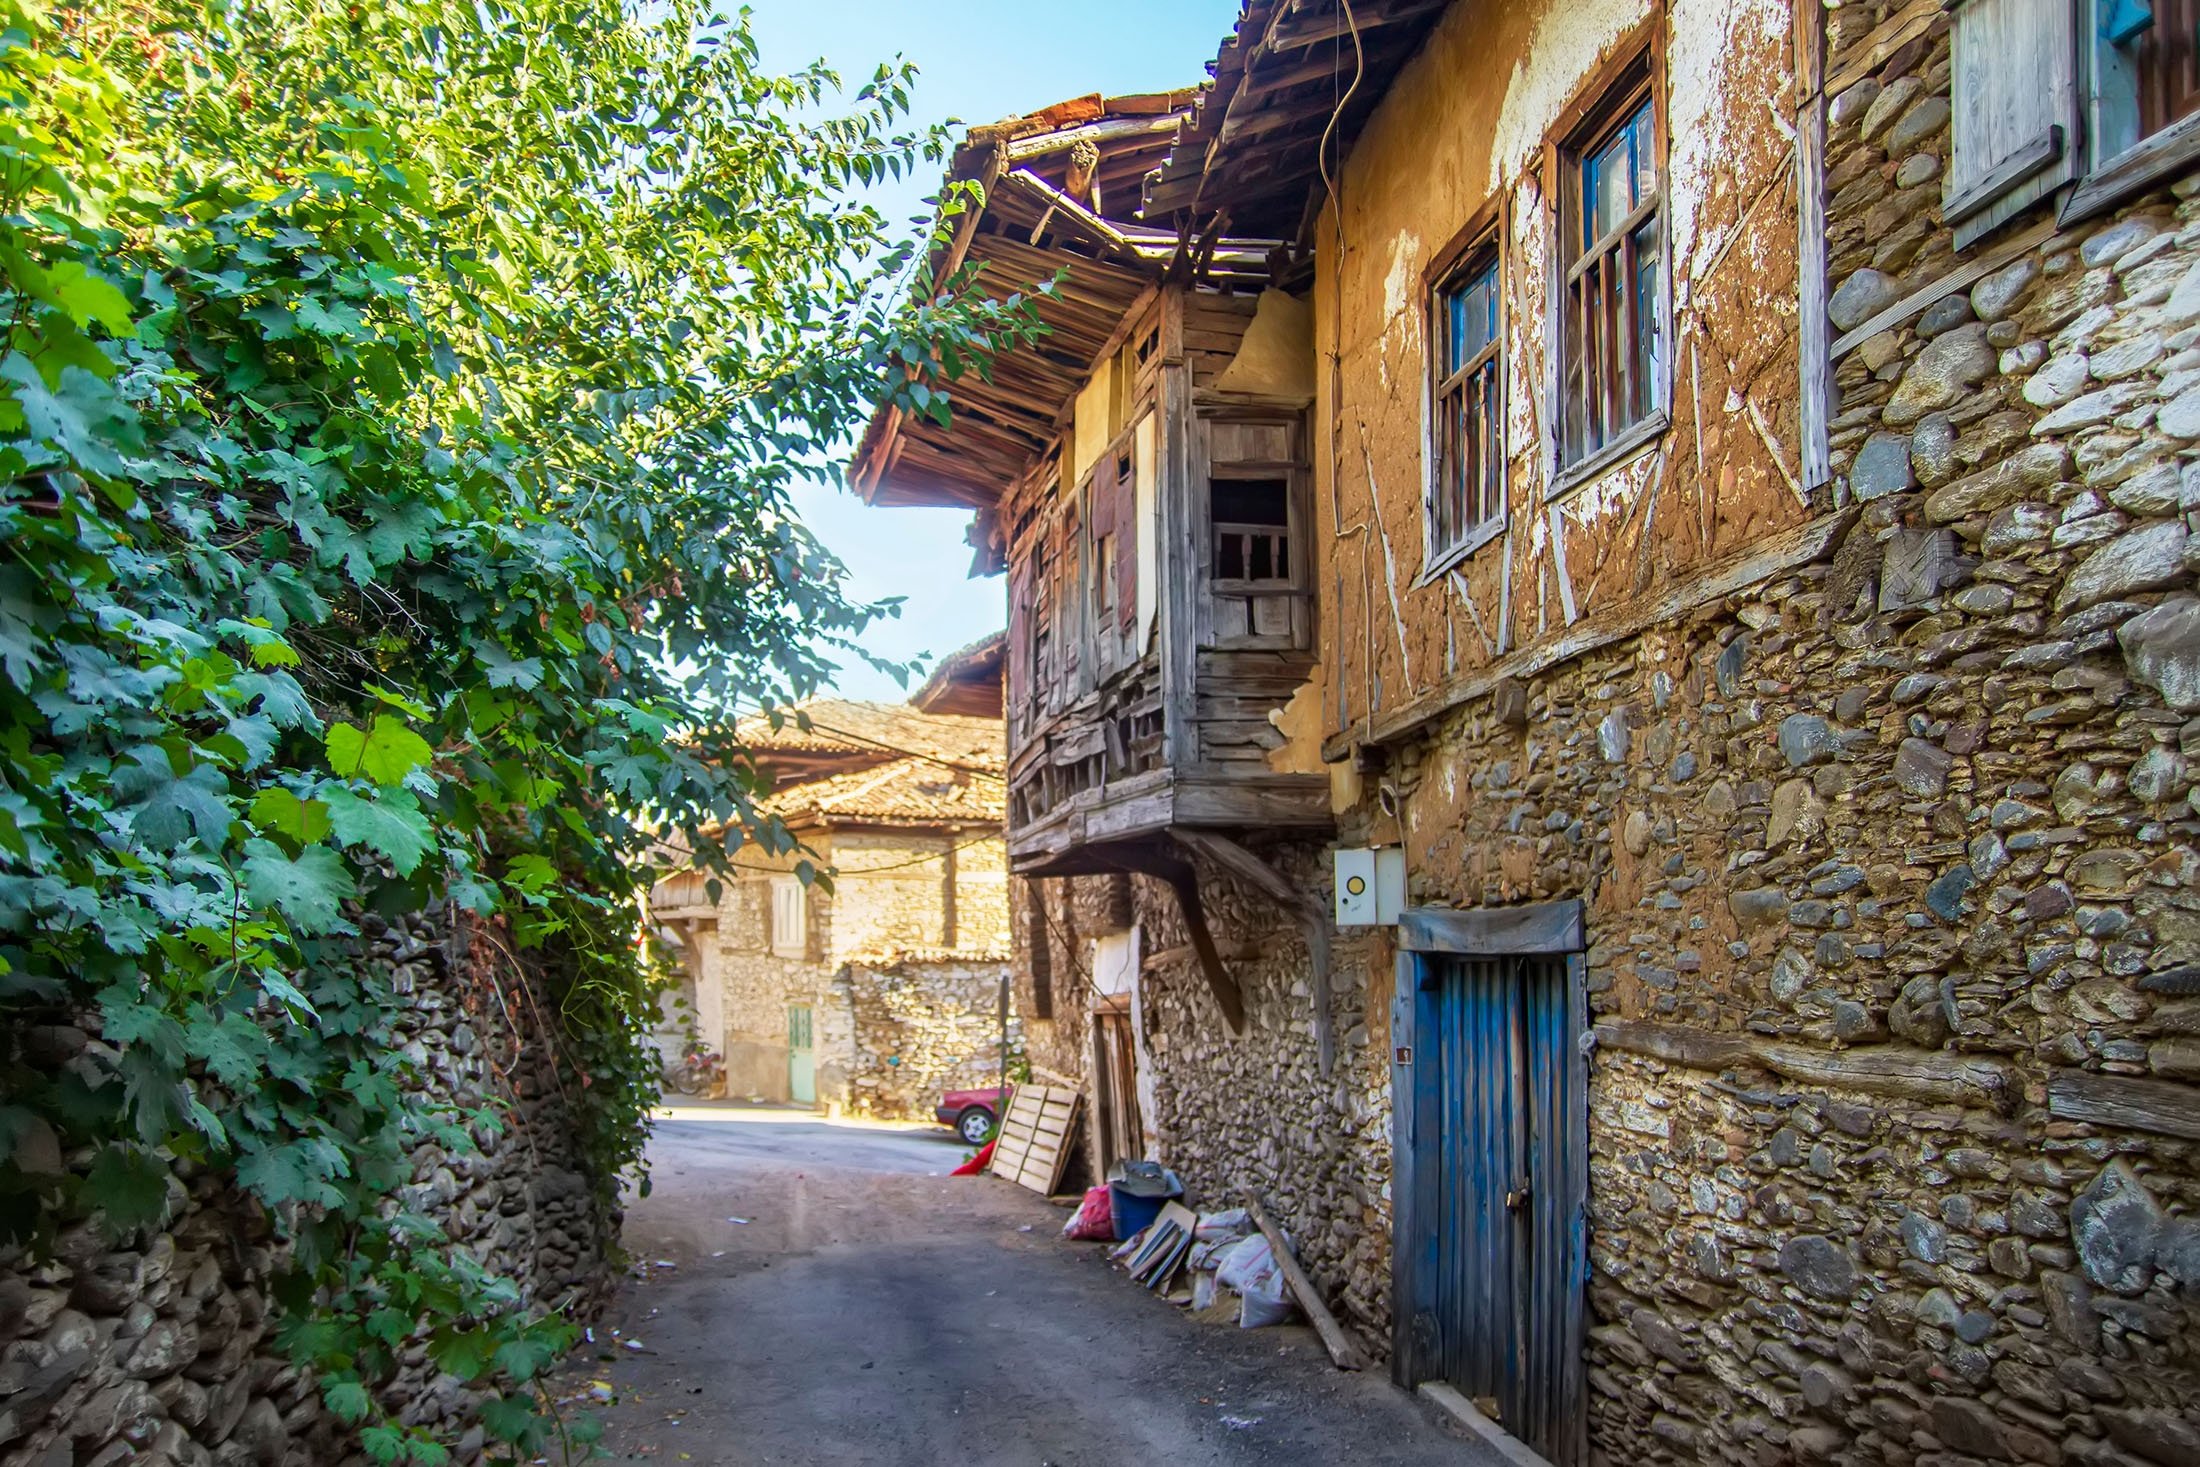 Traditional Turkish Houses in Anatolia According To the Regions.